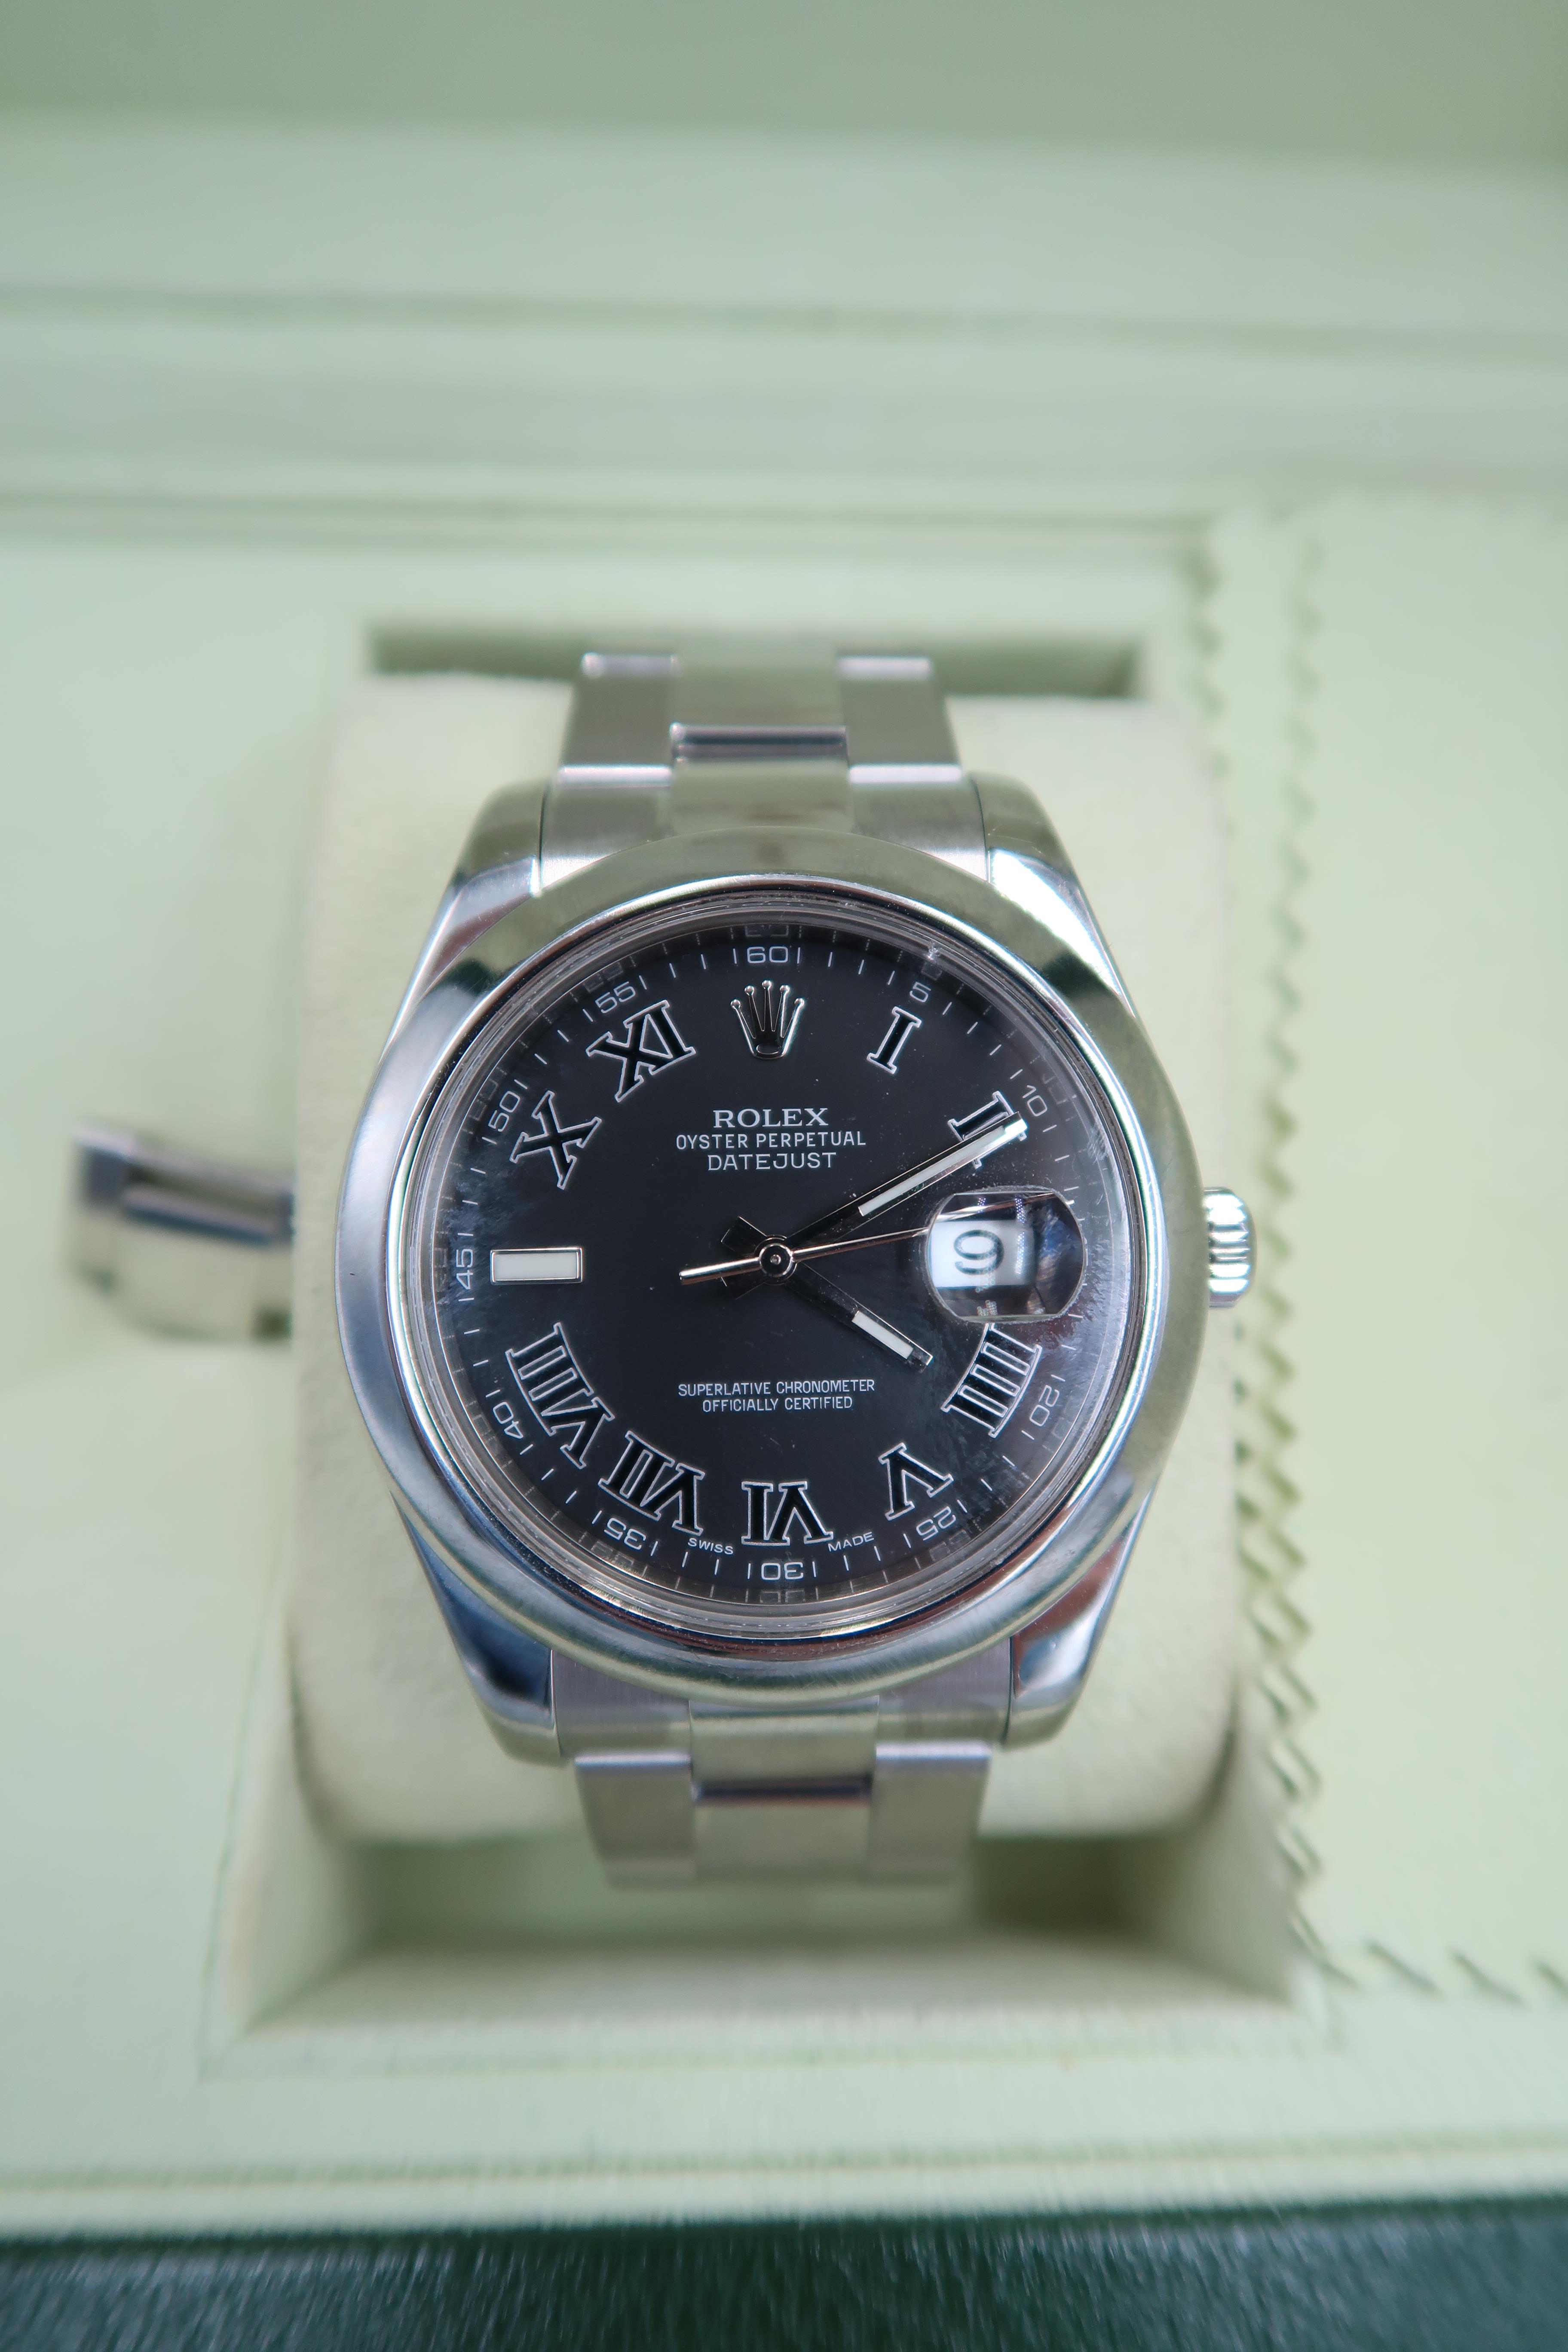 A Rolex Oyster Perpetual Datejust stainless steel wristwatch - Image 8 of 9